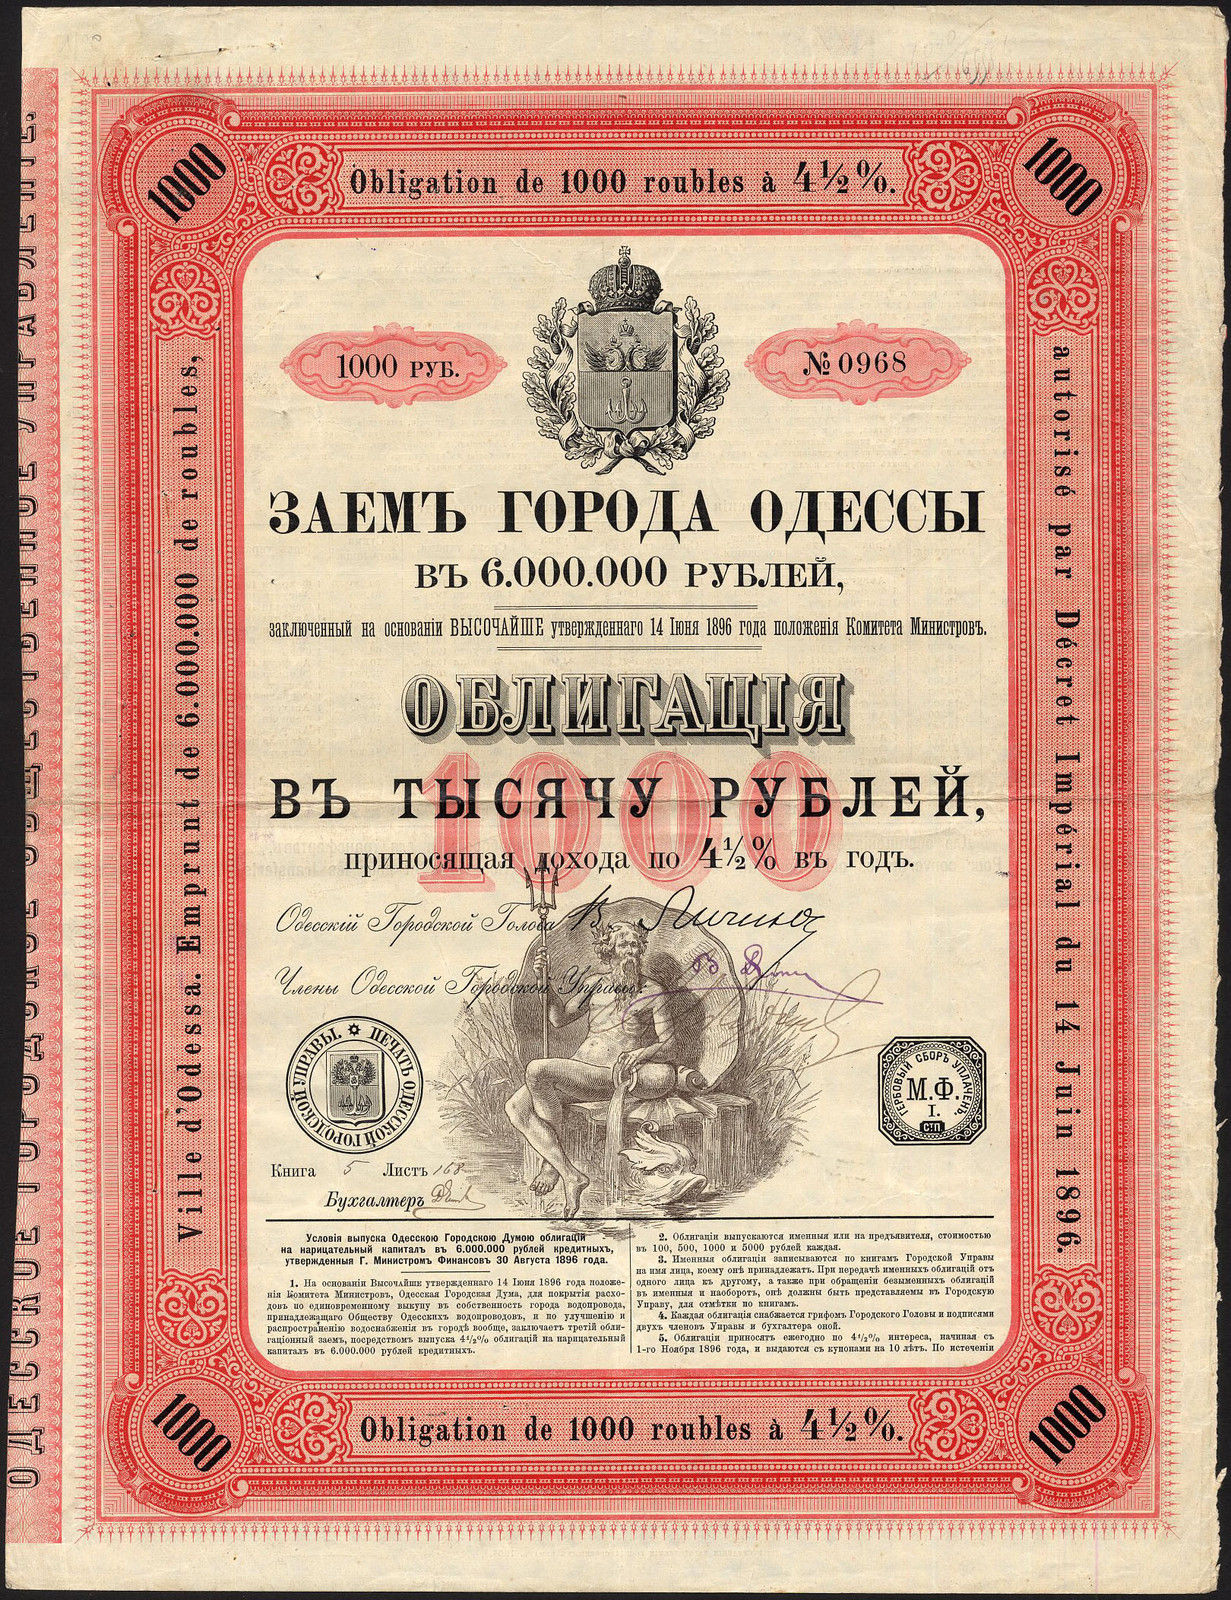 Russia, City of Odessa, 4.5% Loan, 1896, bond for 1000 roubles | eBay